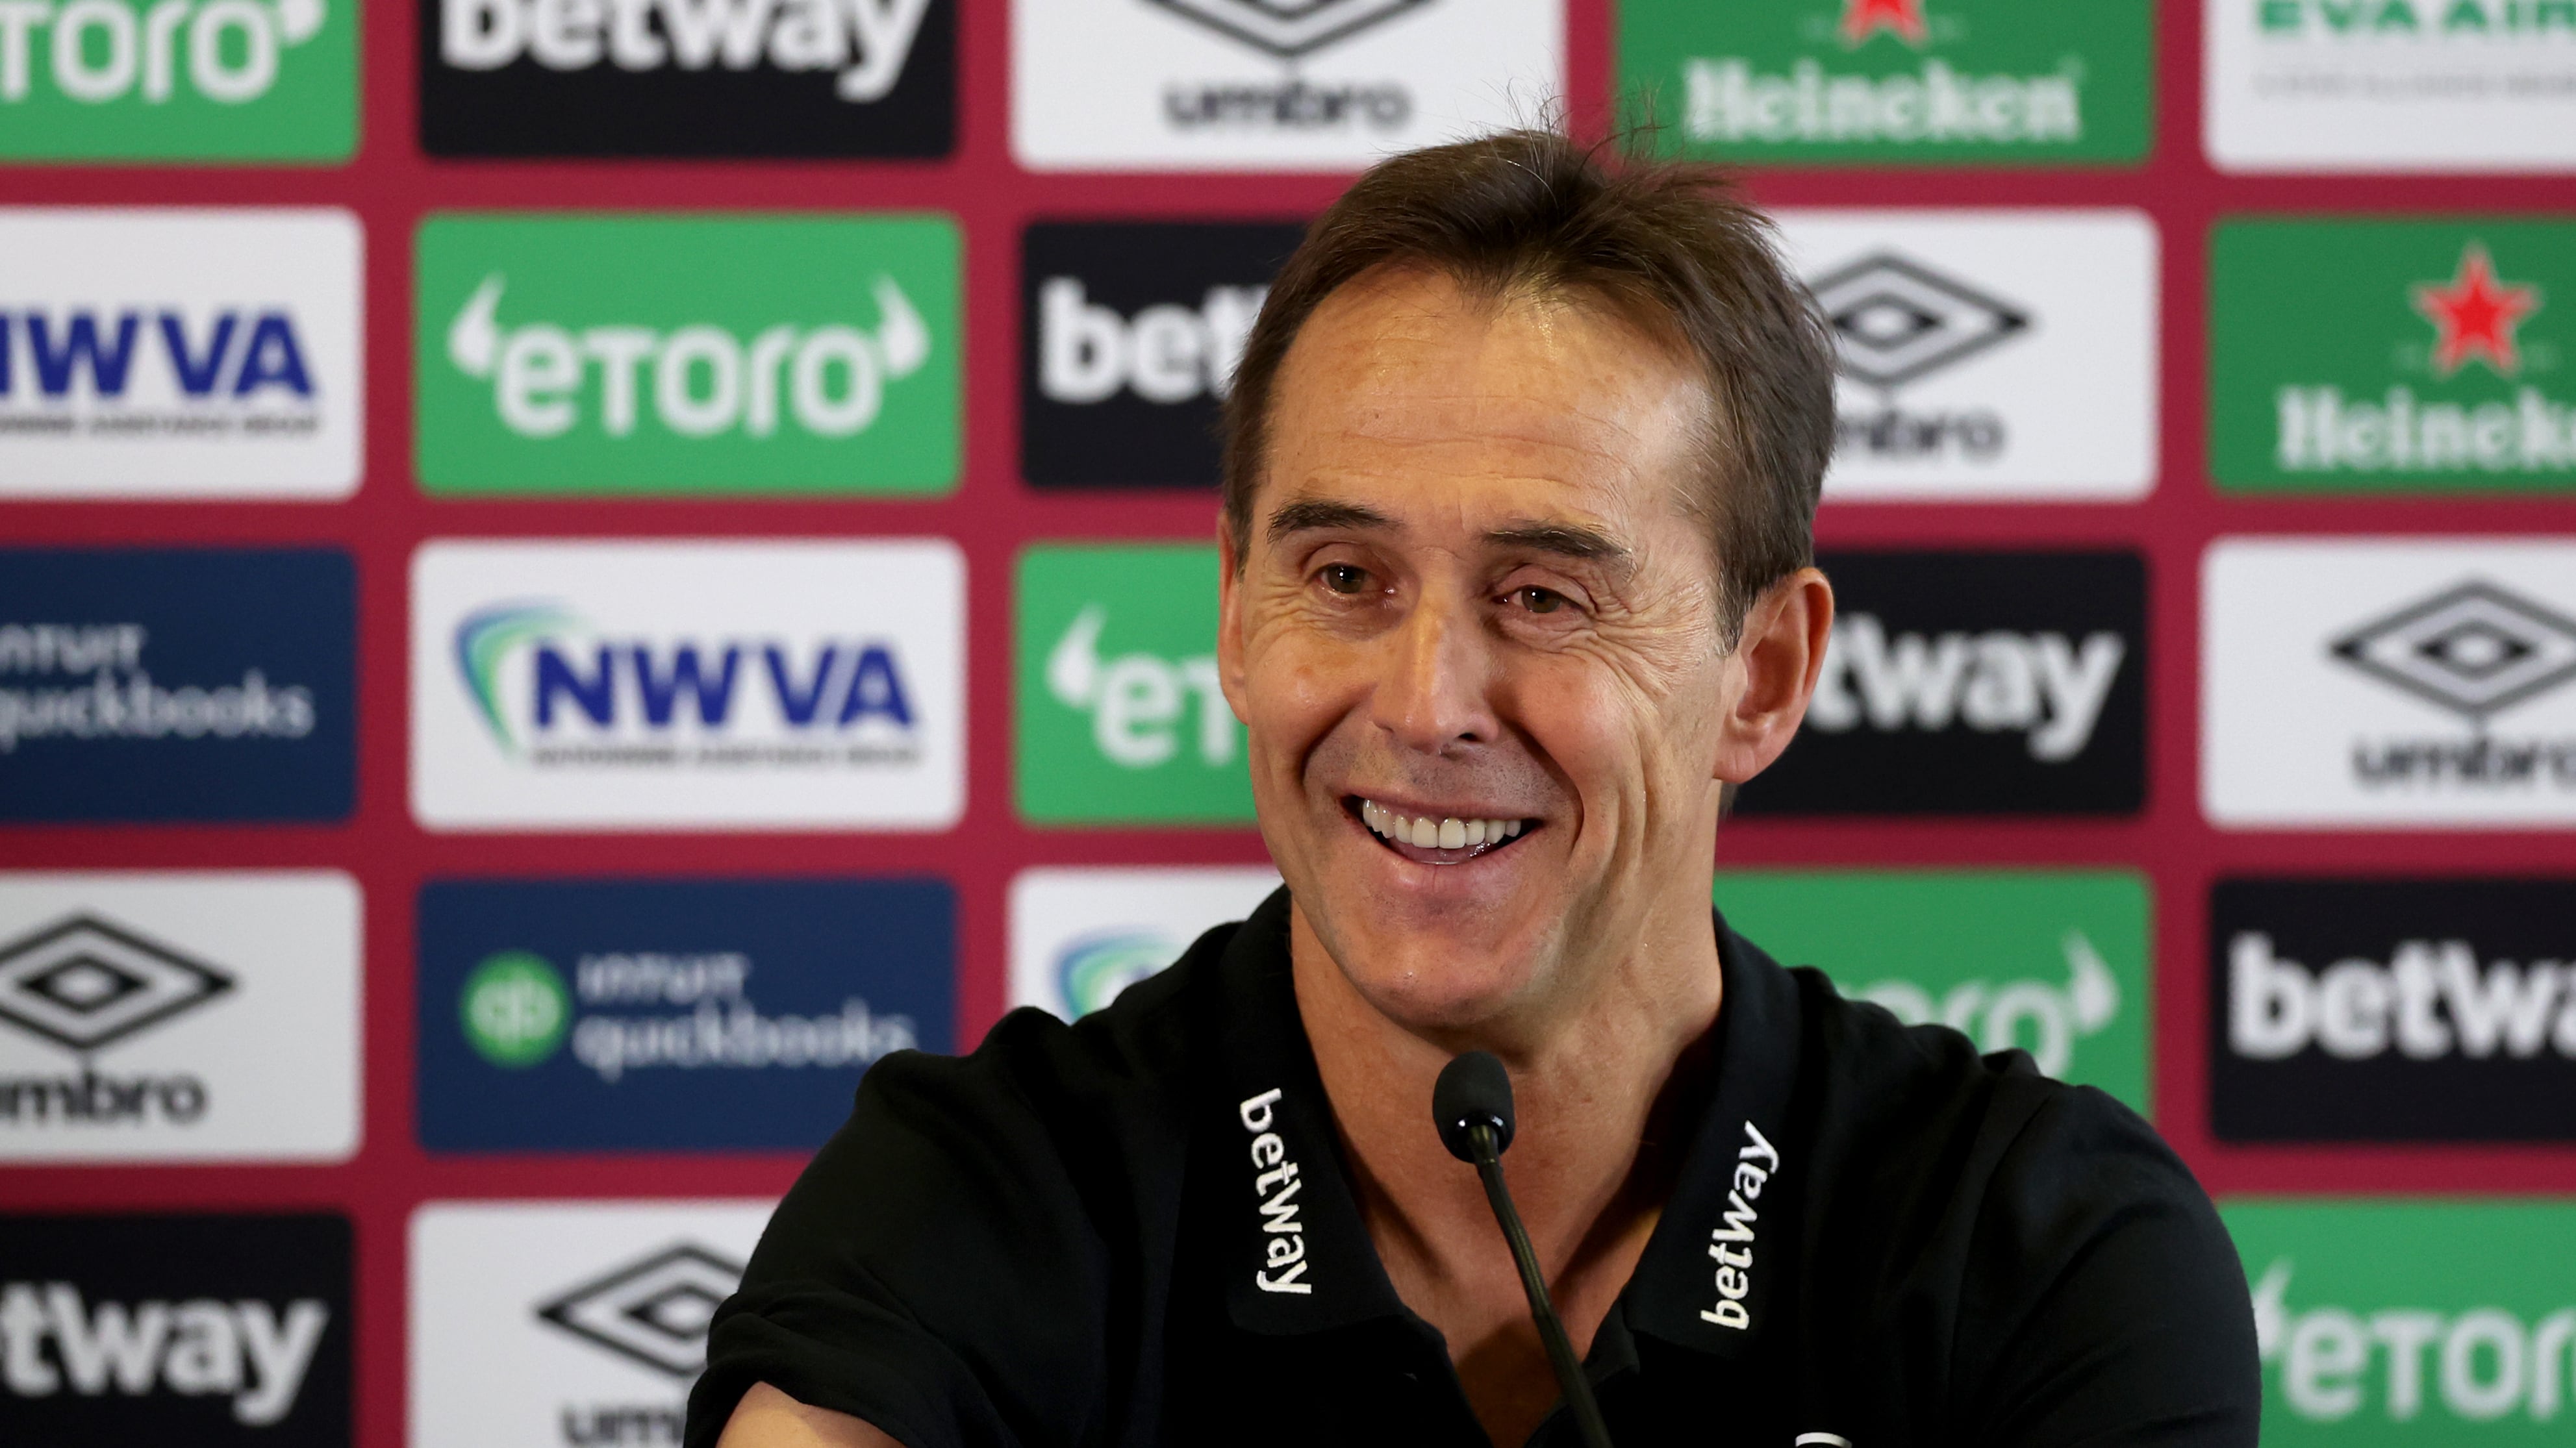 Julen Lopetegui highlighted the importance of West Ham’s supporters ahead of the new season